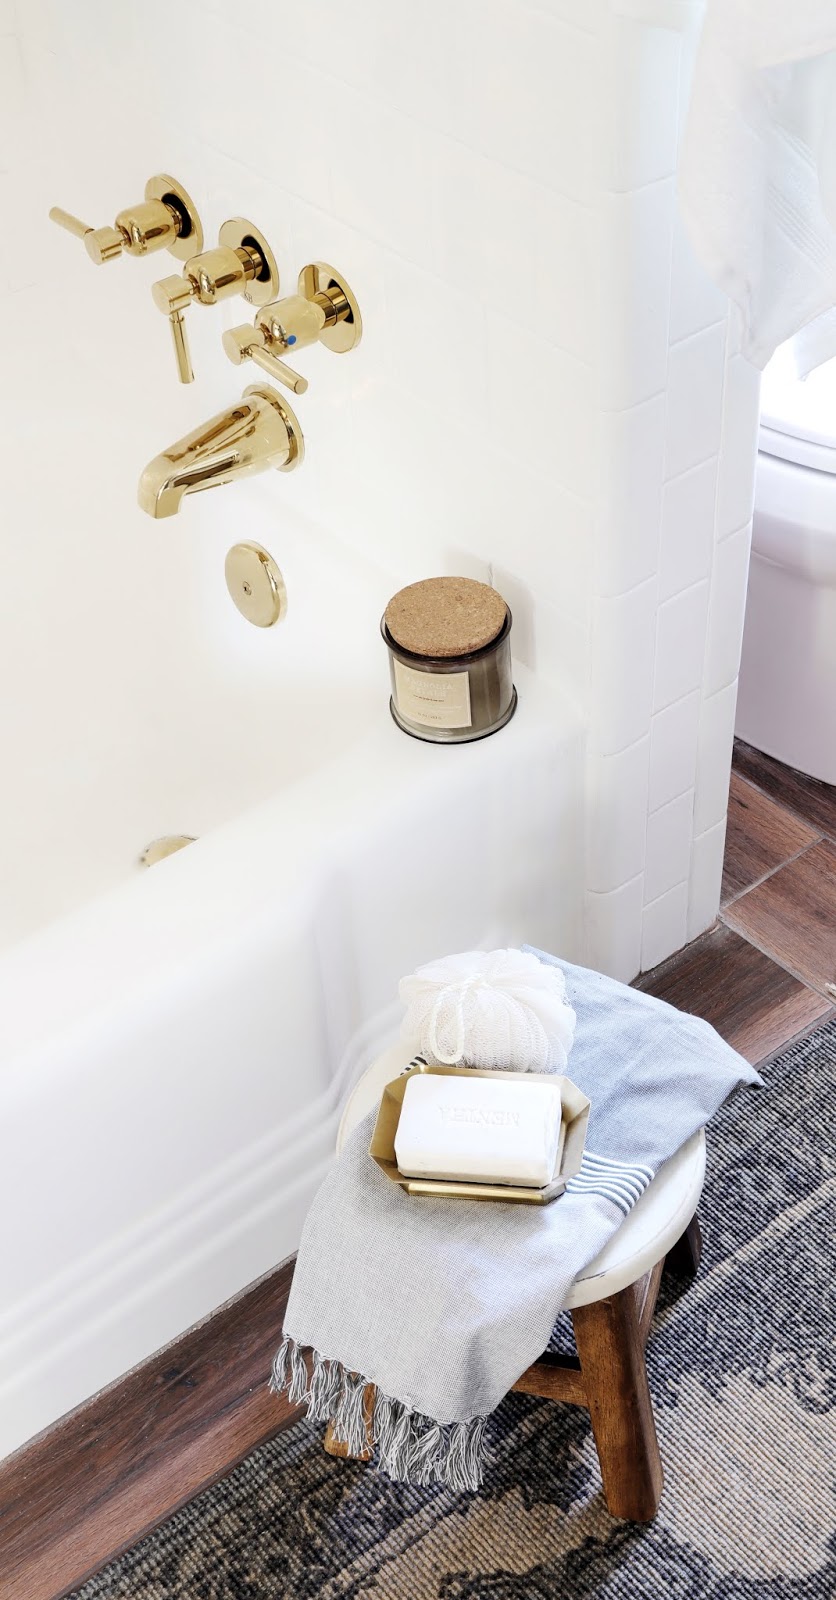 Tub Shower Reveal With Modern Polished Brass Fixtures Made By Carli